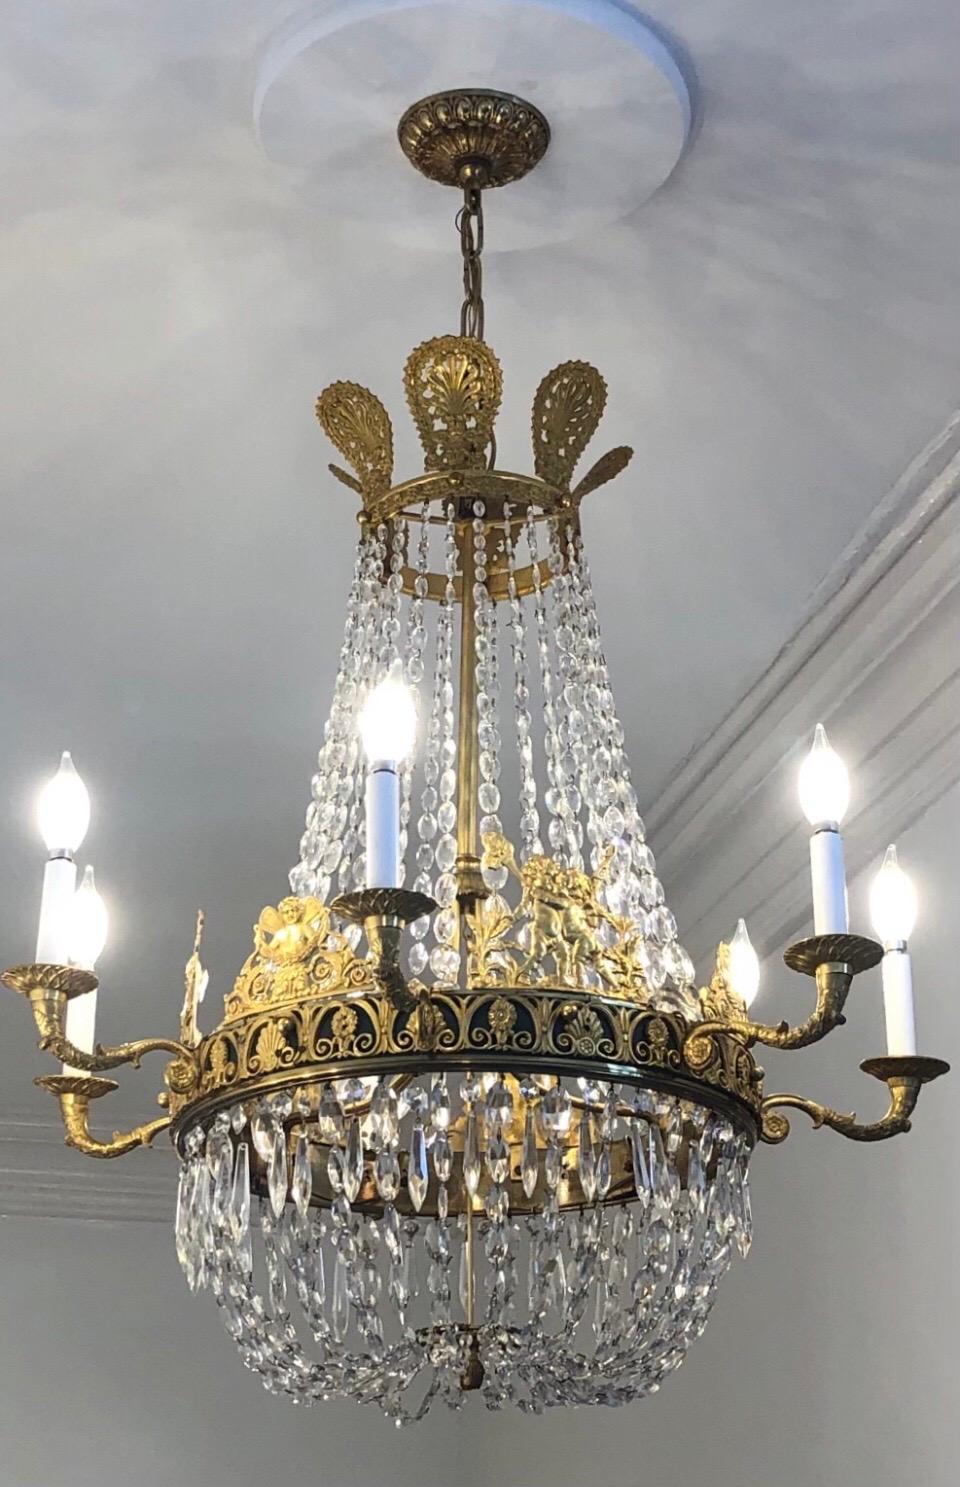 This Empire chandelier has a bronze Doré Corona above oval shaped crystal chains descending to Doré mounted circular dark green painted bronze band with seven candelabra arms and terminating in an elegant crystal chain basket.